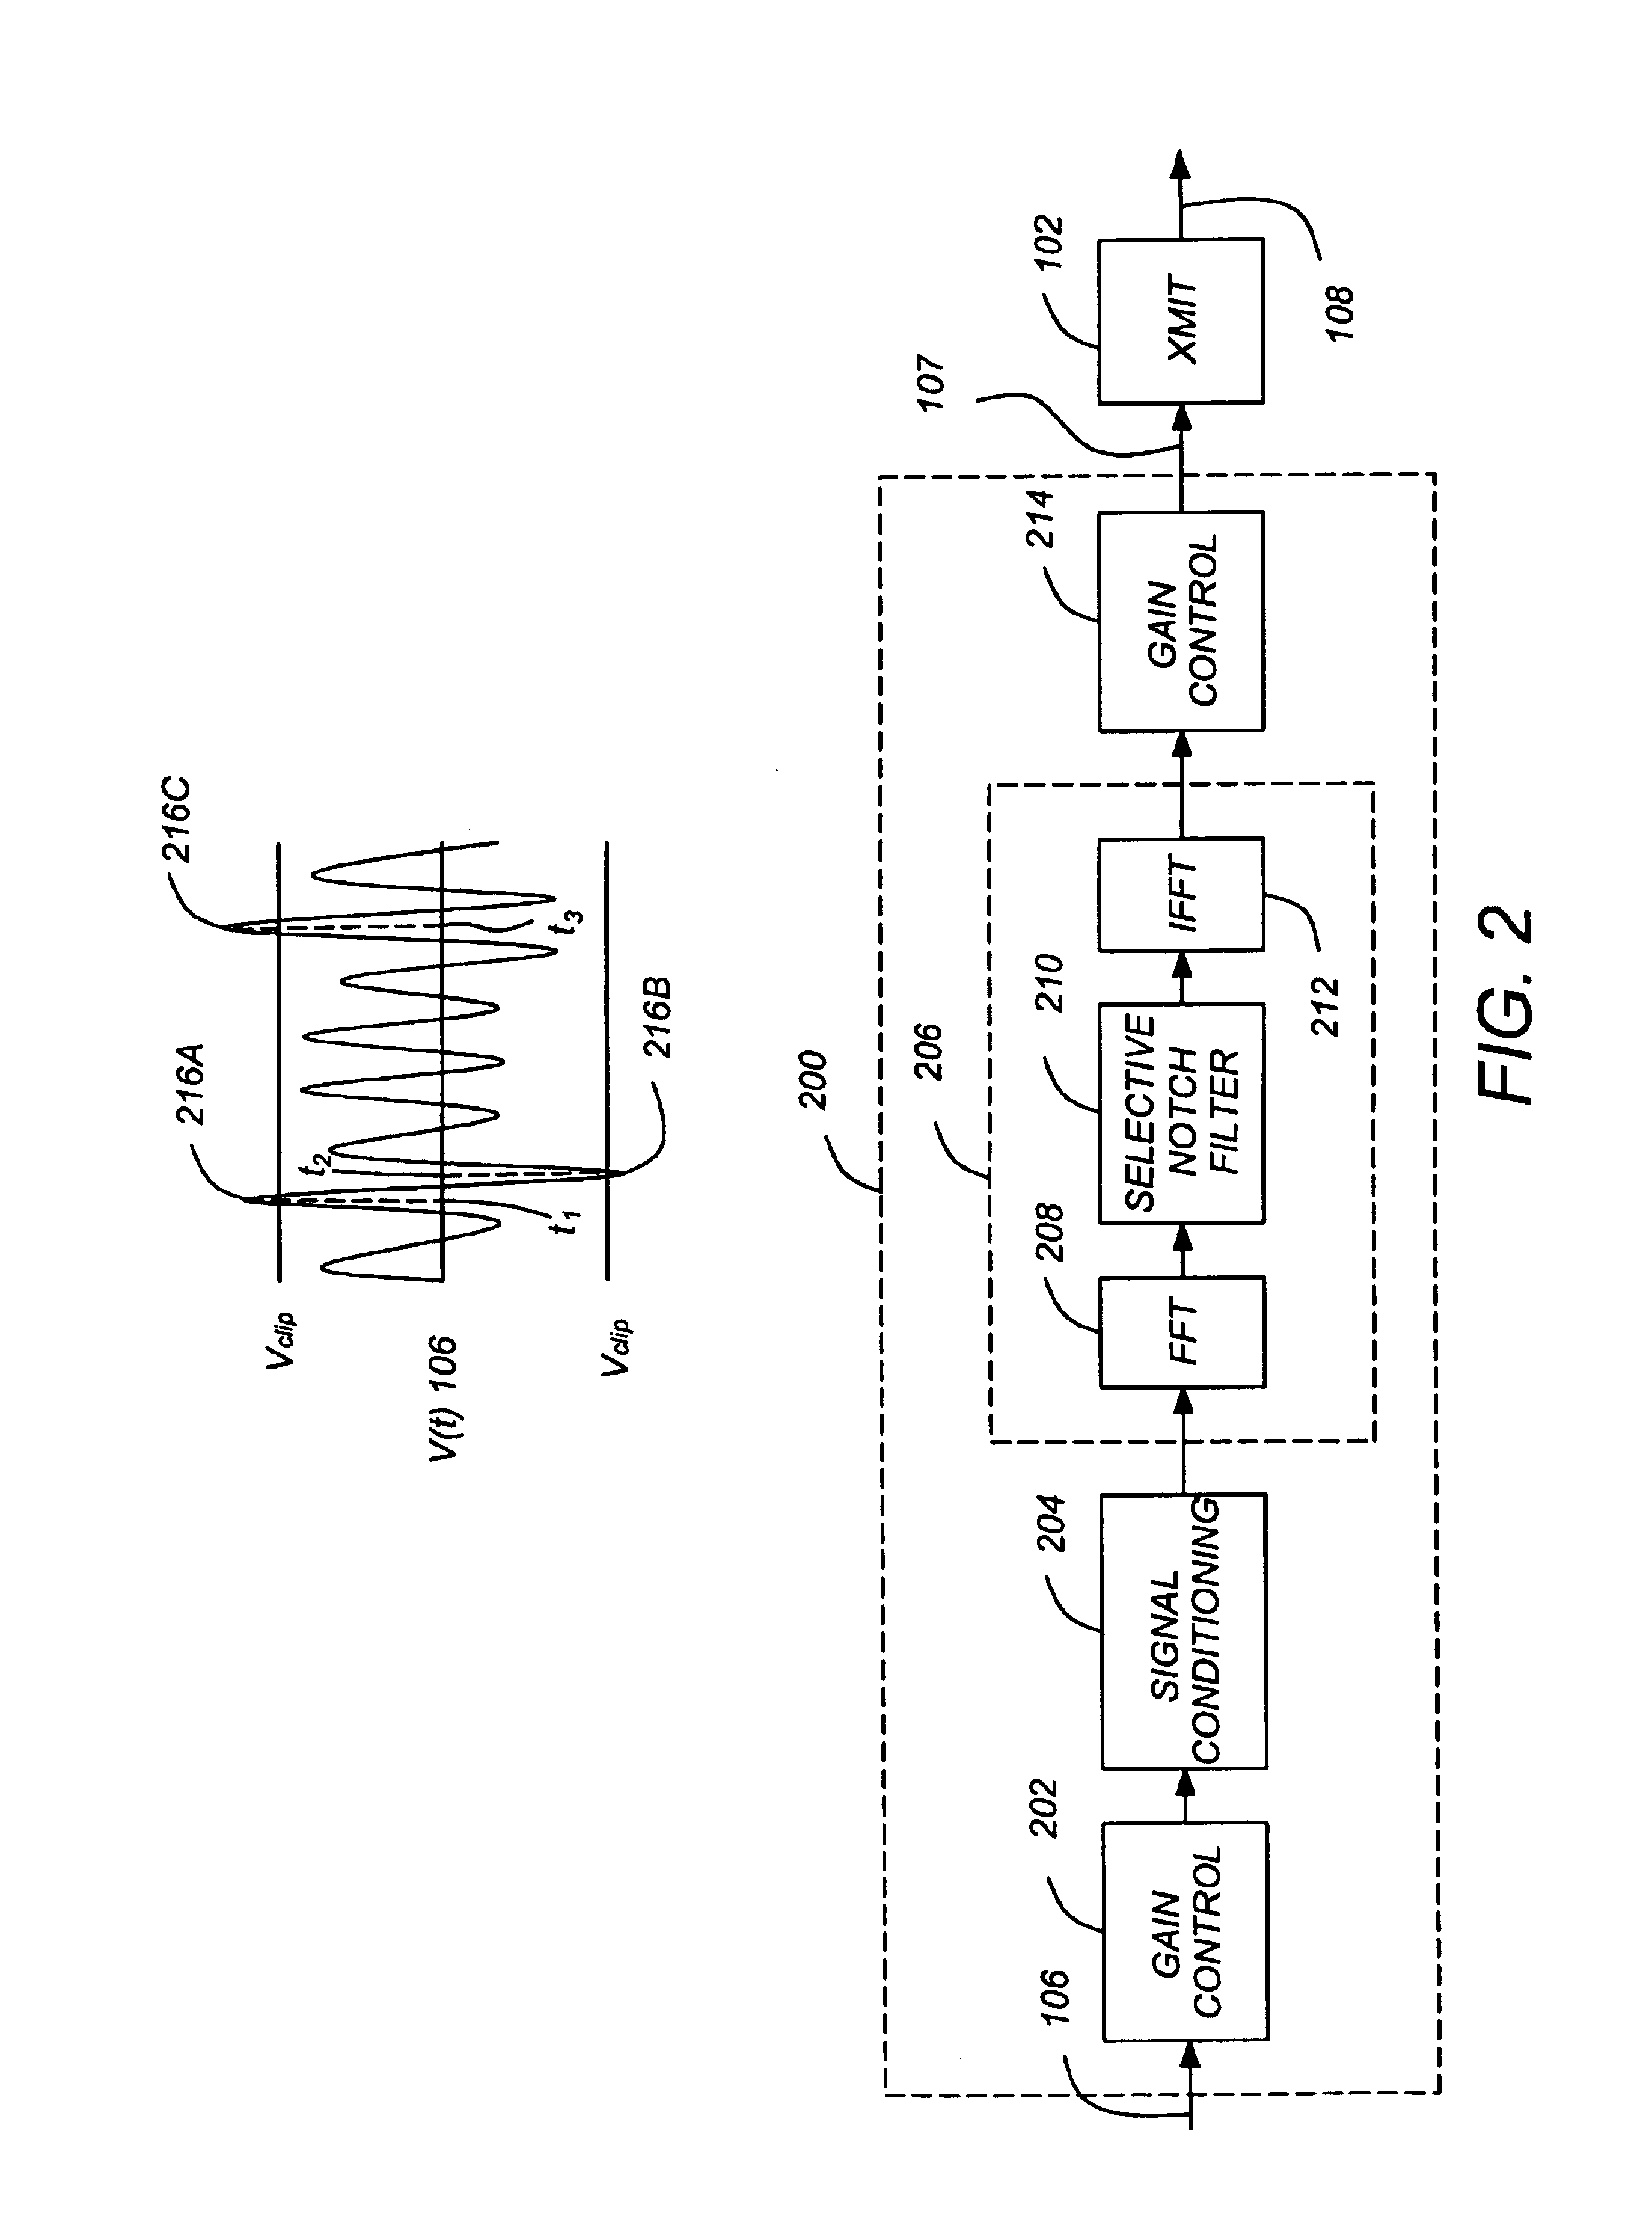 Method and apparatus for low intermodulation distortion amplification in selected bands